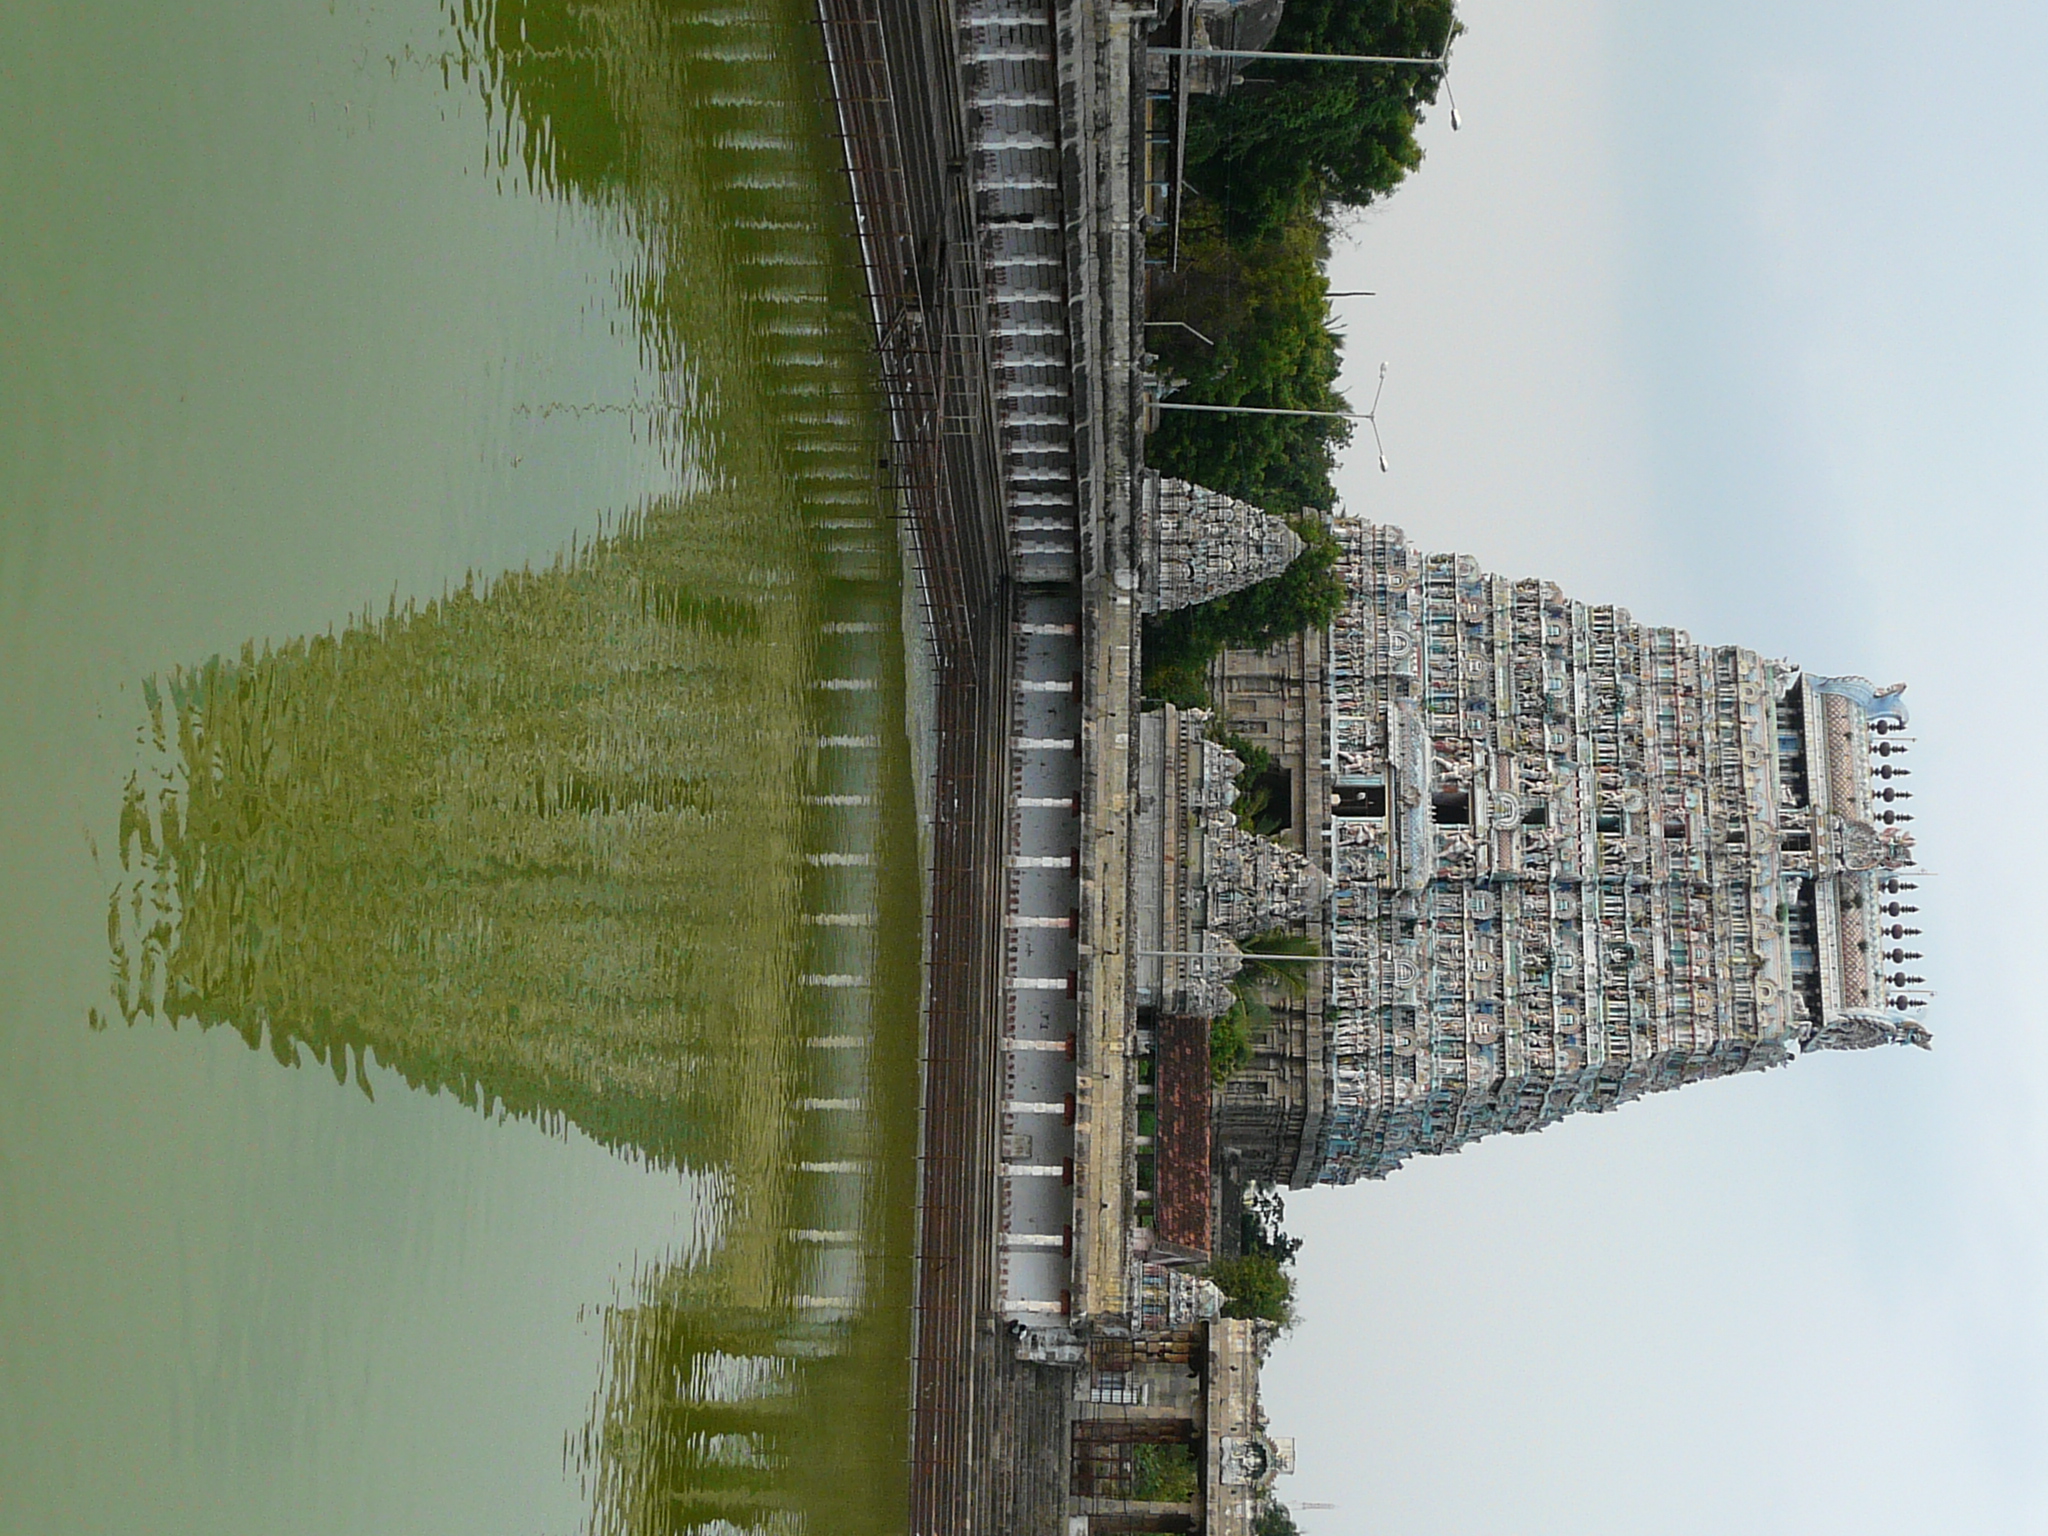 a beautiful view of the temple, its lake and surrounding building